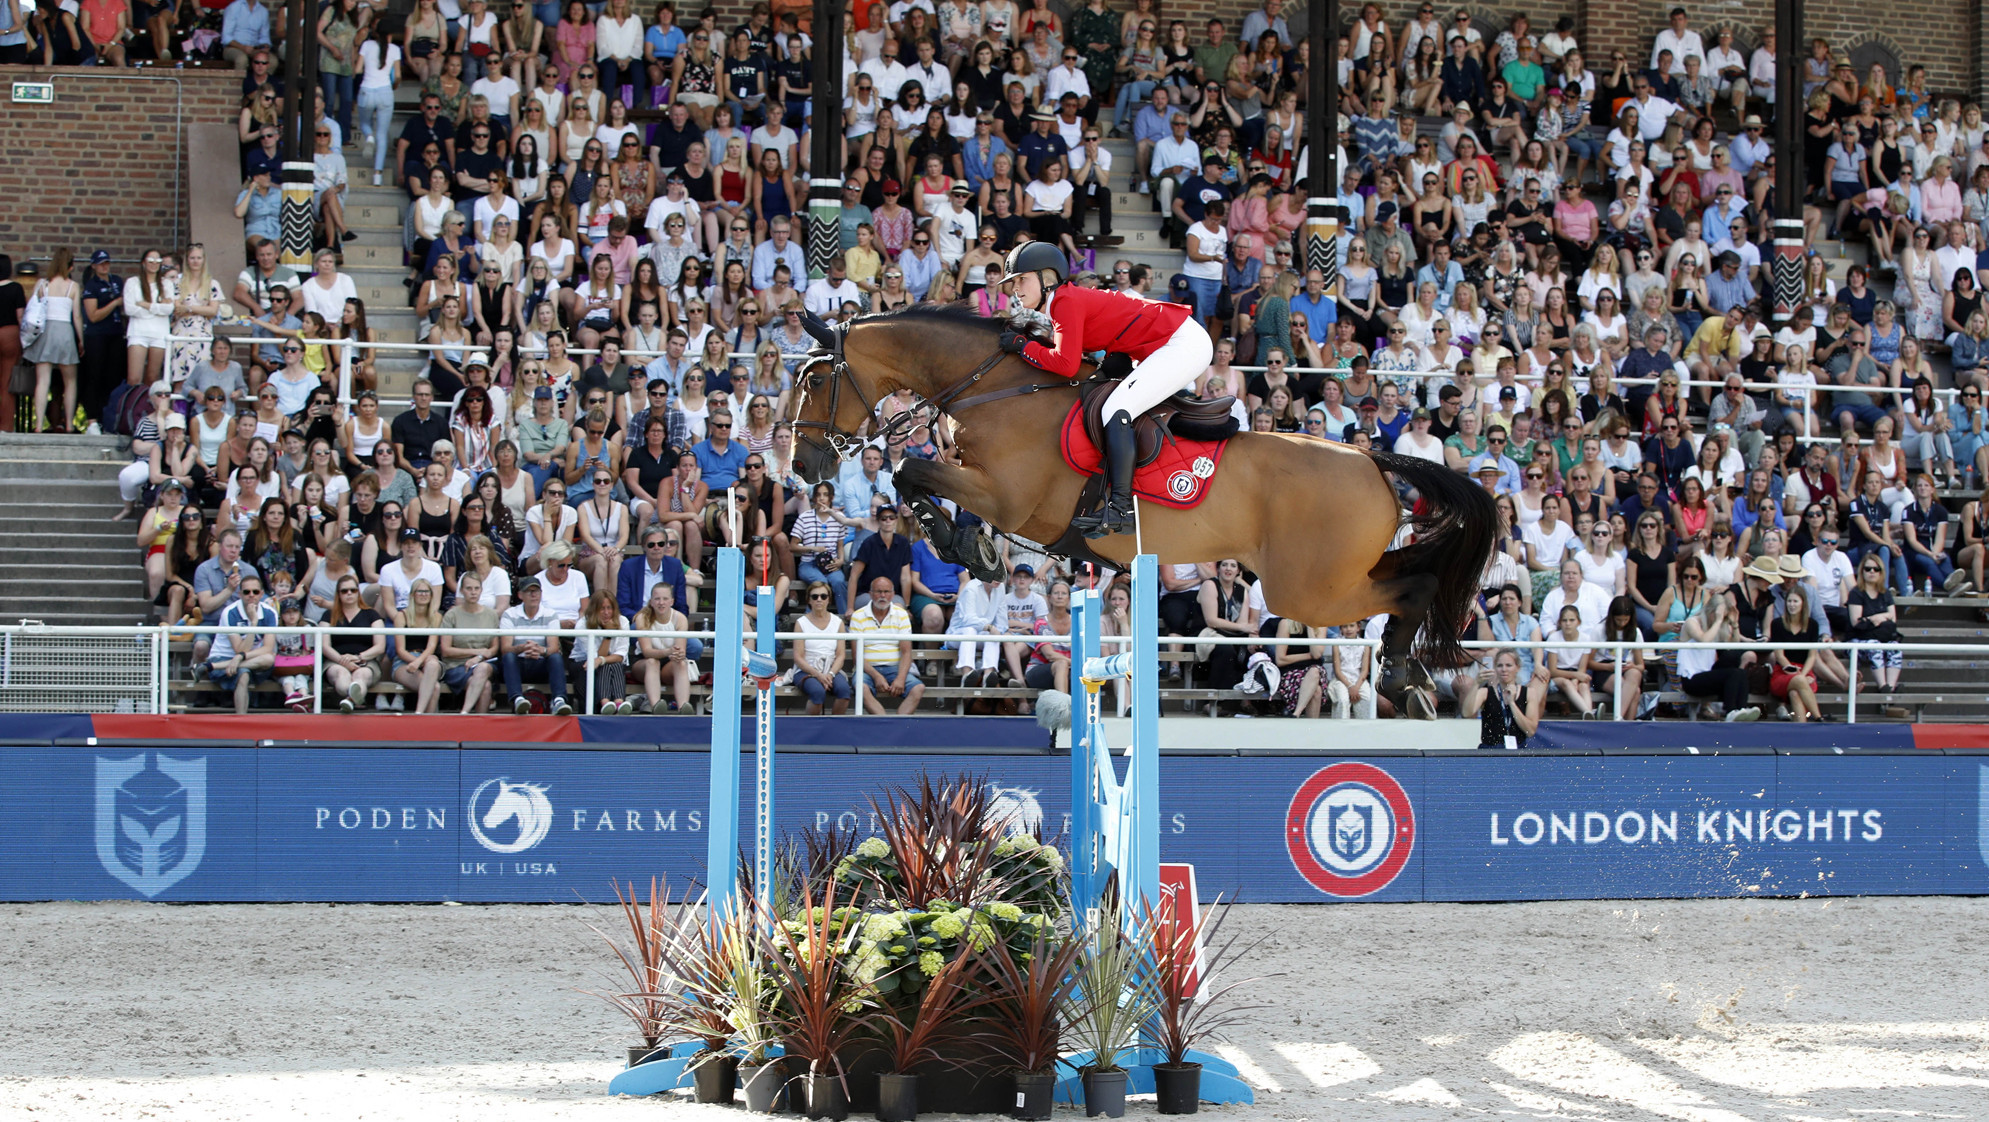 London Knights duo Moffitt and Maher triumph at Longines GCL event in Stockholm